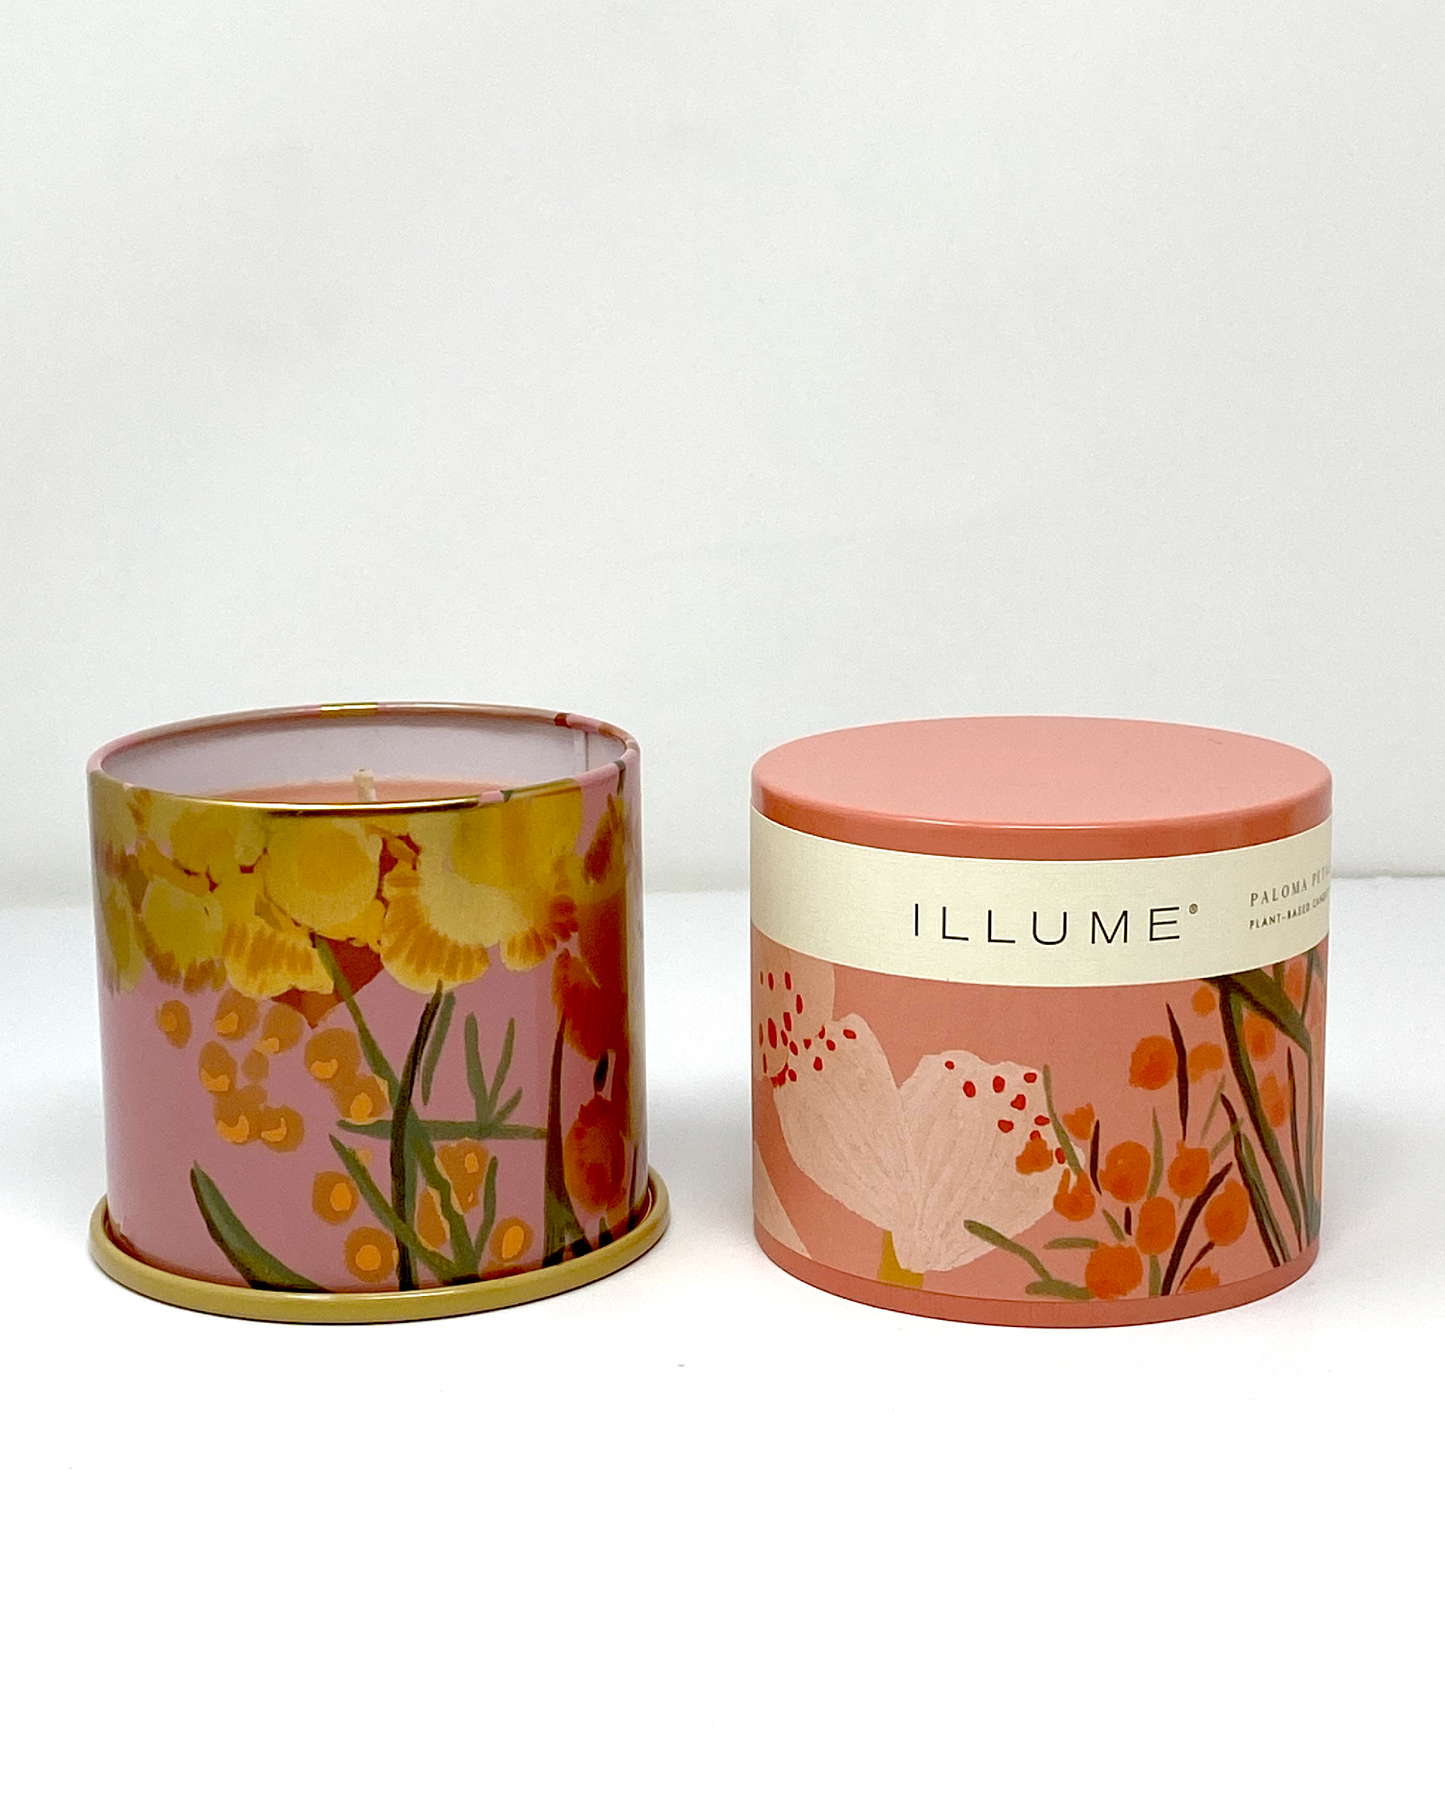 Illume Candles are refillable and smell and look lovely! These candles burn for 32+ hours and the illustrated packaging is so beautiful.